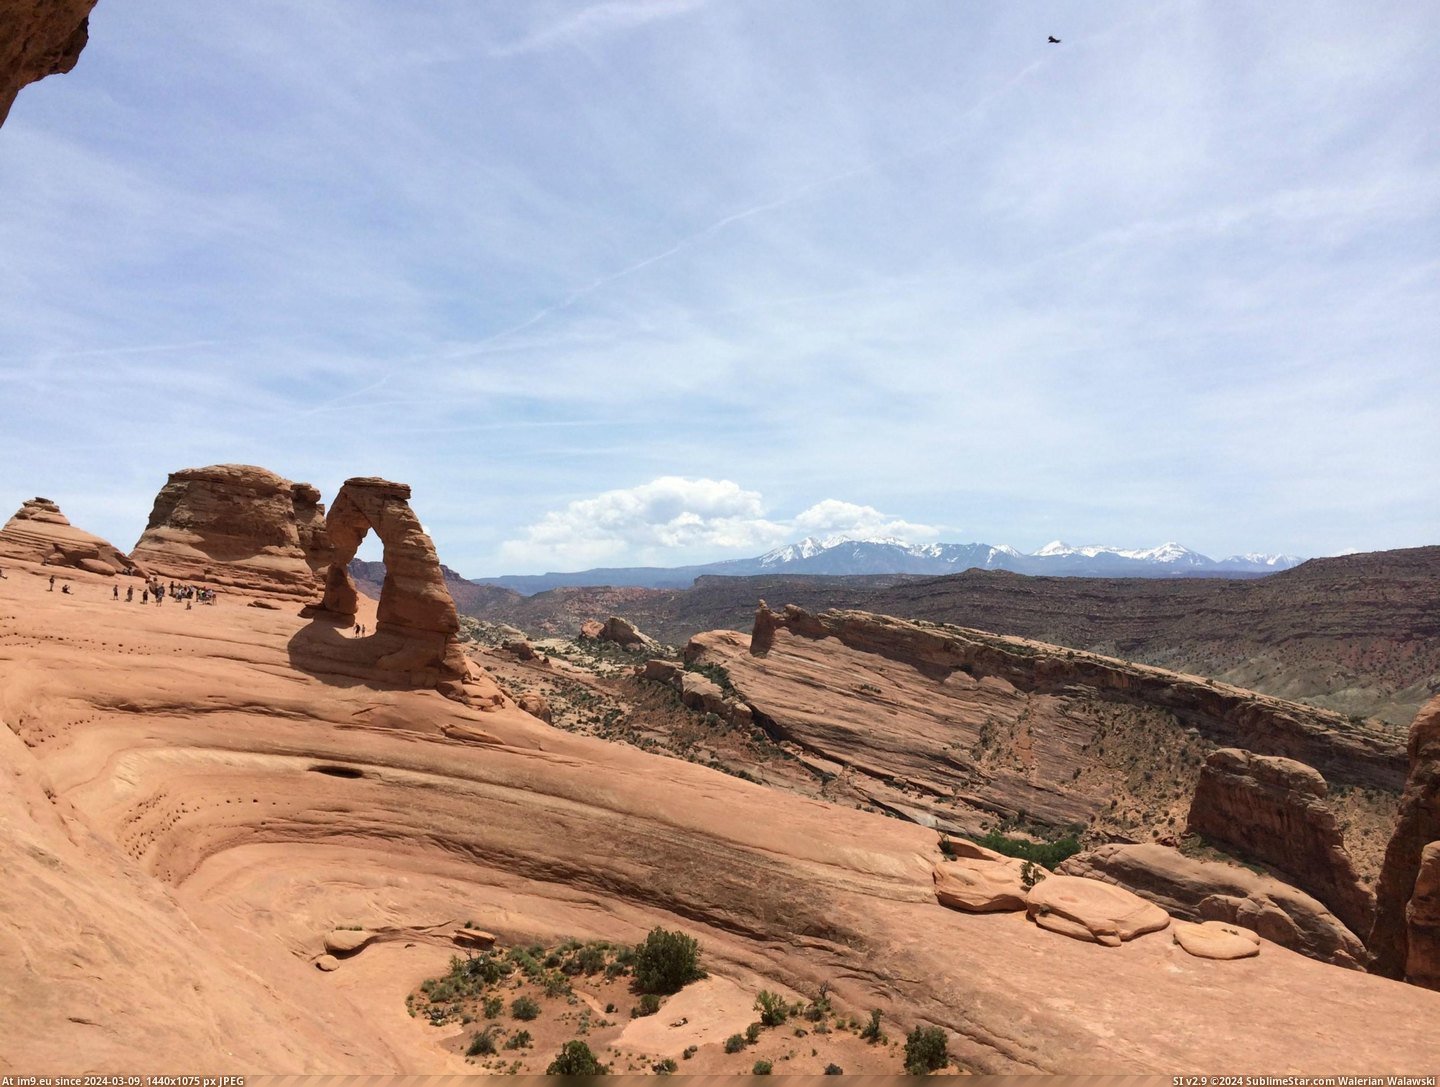 #Park #National #Arch #Delicate #Arches #3264x2448 #Utah [Earthporn] Delicate Arch in Arches National Park, Utah [3264x2448] [OC] Pic. (Image of album My r/EARTHPORN favs))